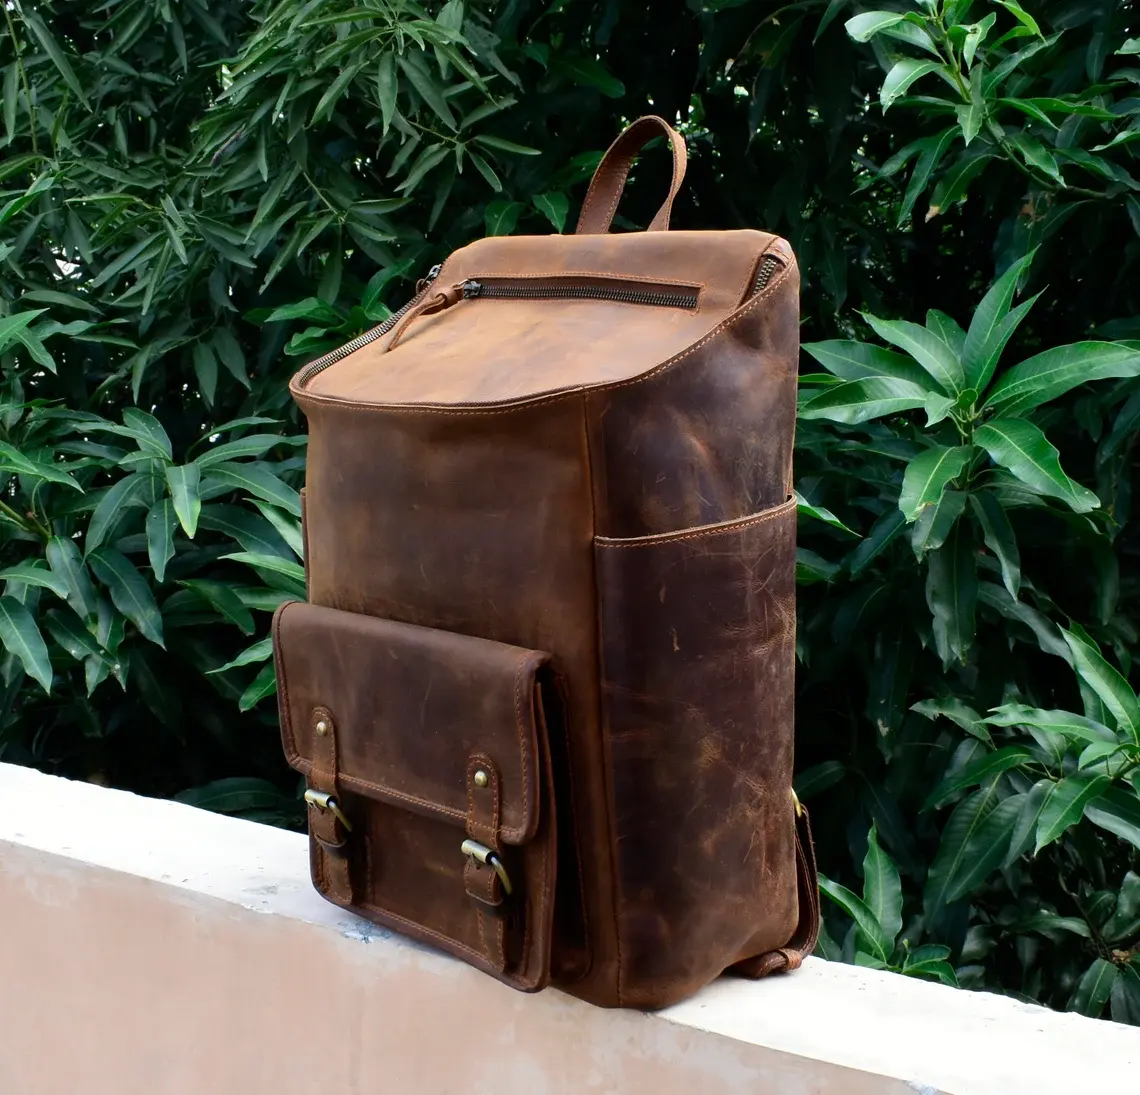 Personalized Handmade Full Grain Leather Travel Laptop Backpack Rucksack Rustic Brown Leather Best Product In Best Price